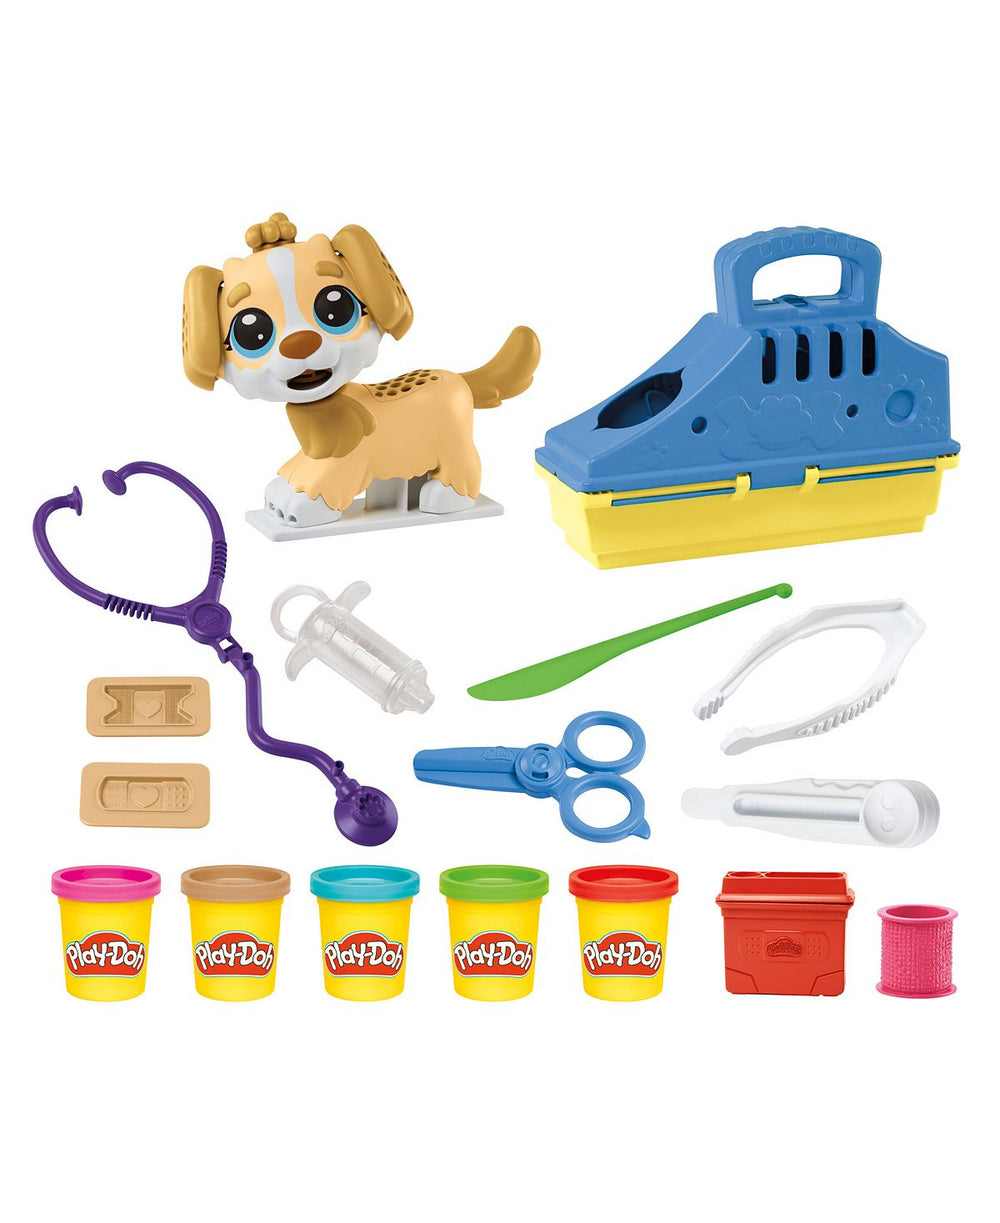 Play-Doh Care and Carry Vet Set - 17-Piece Interactive Toy Veterinary Kit